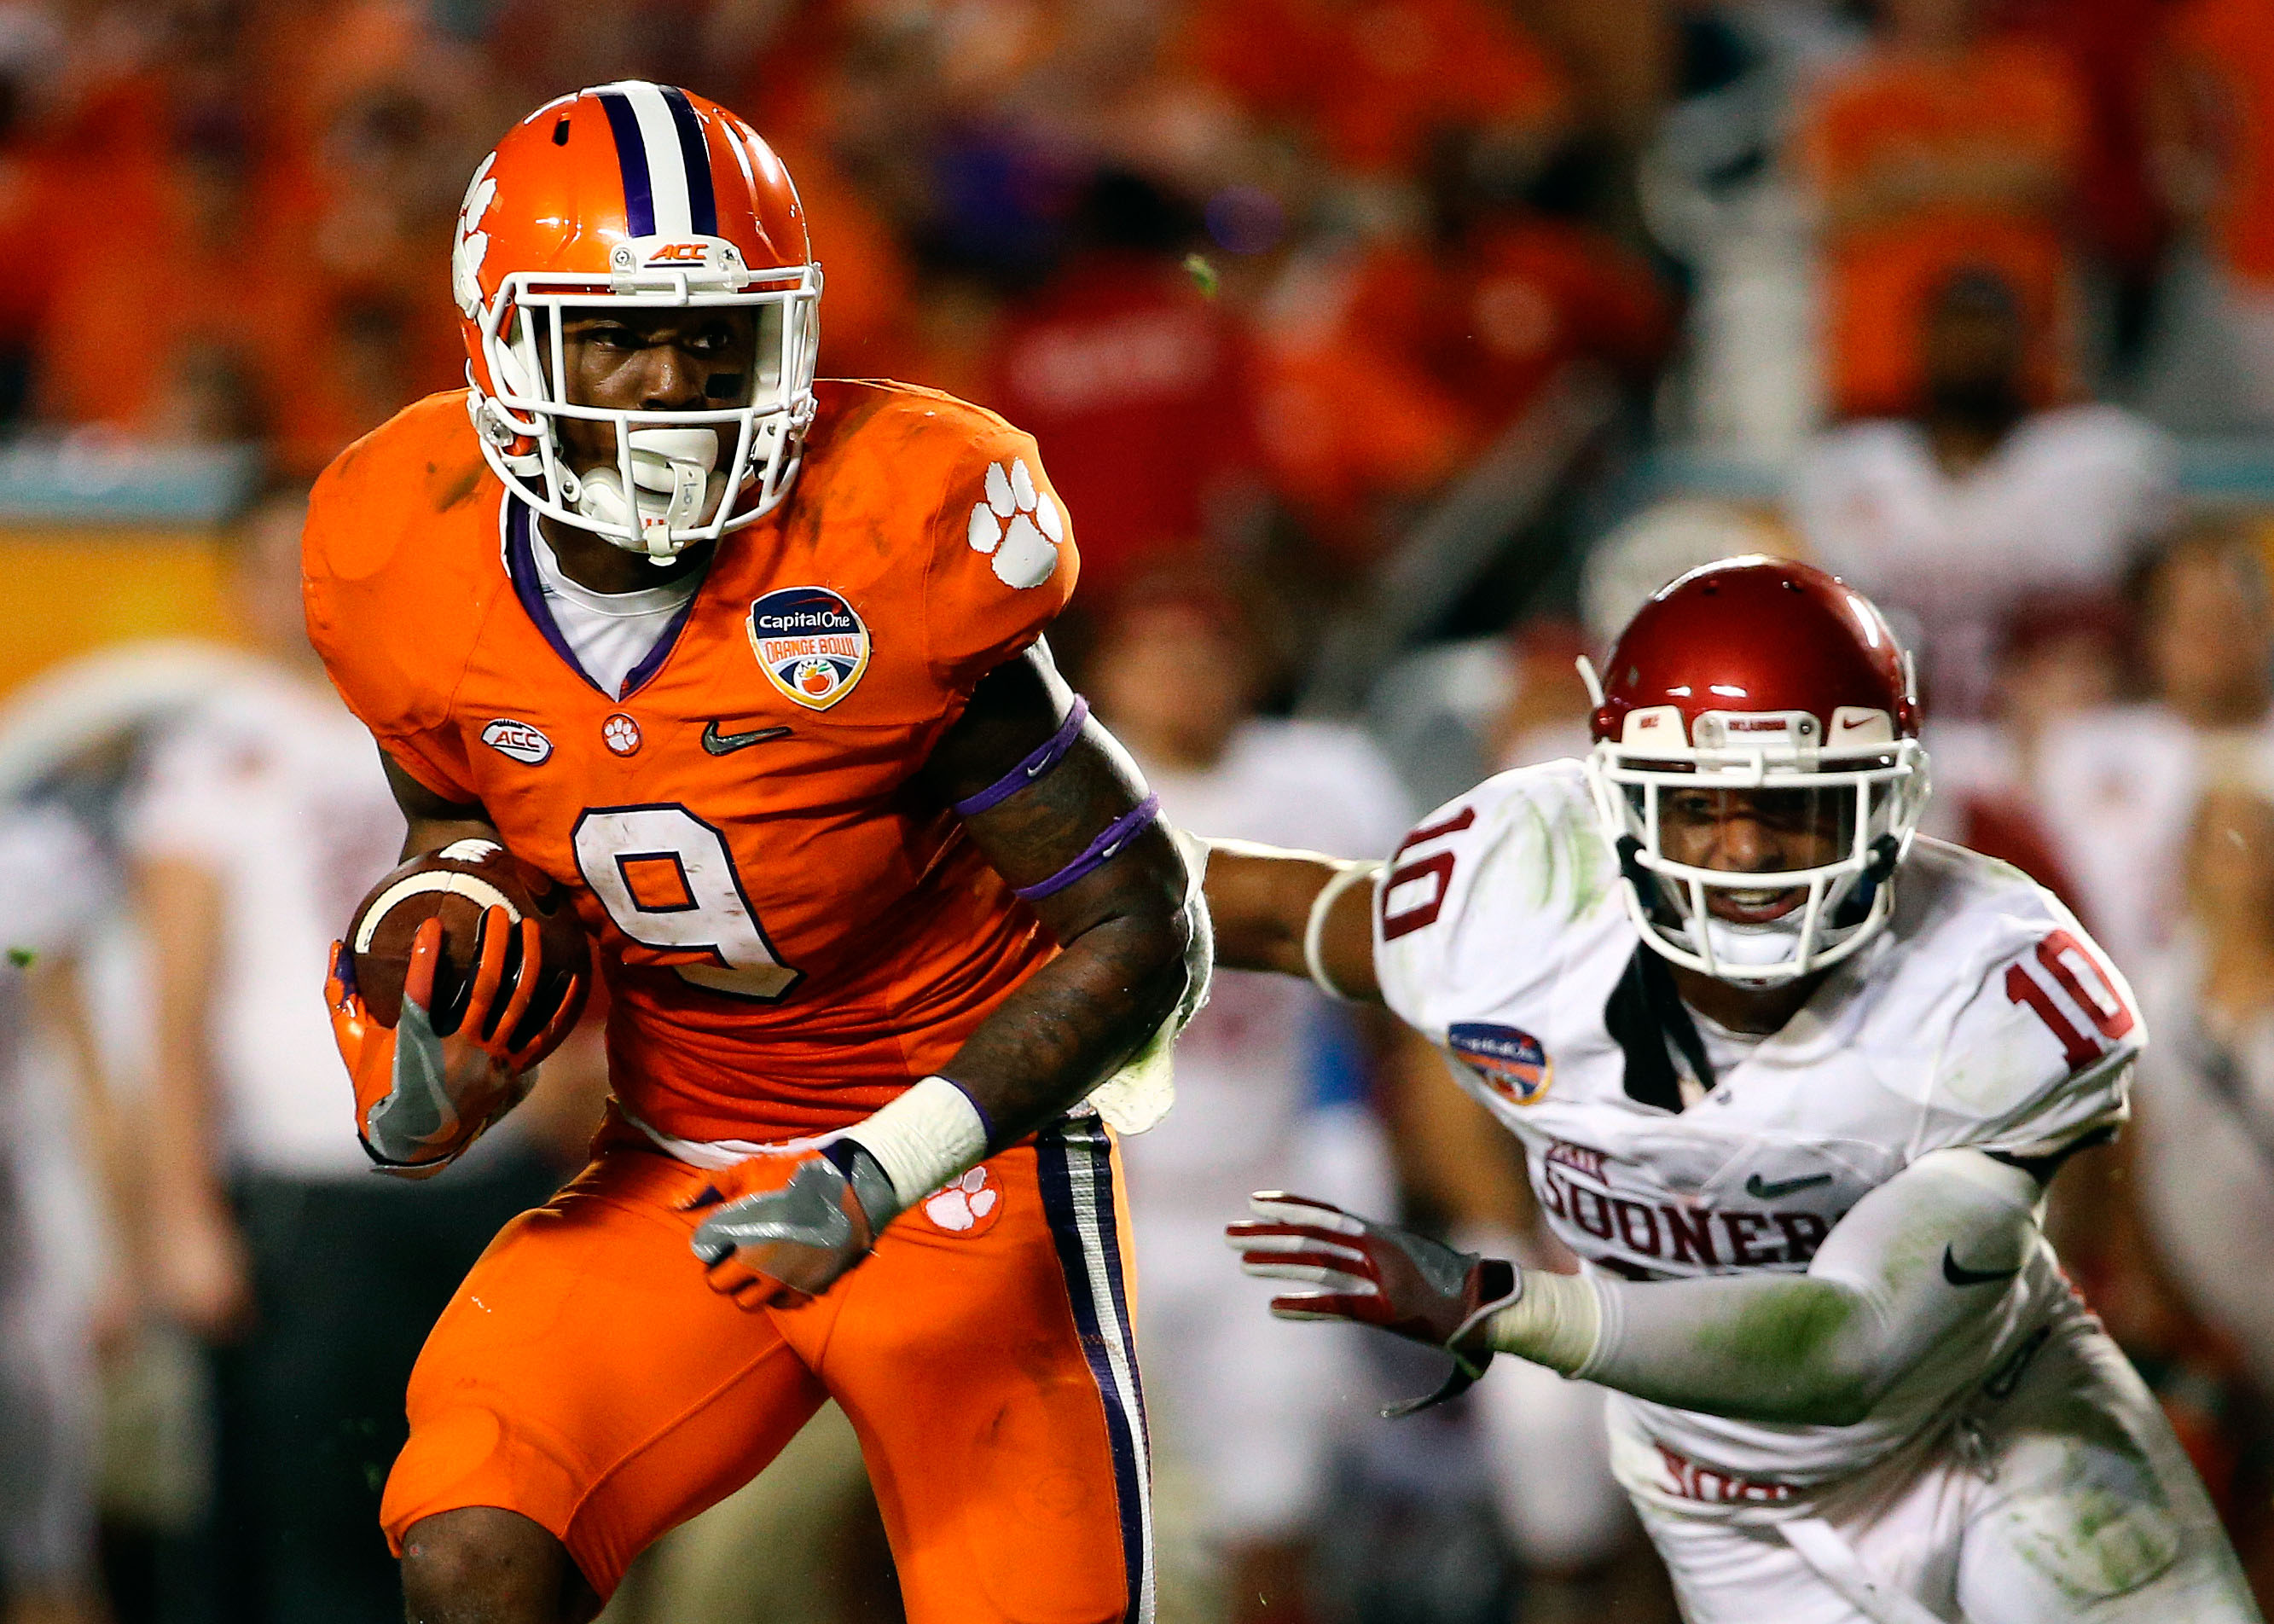 Which Clemson Players are Staying or Leaving?